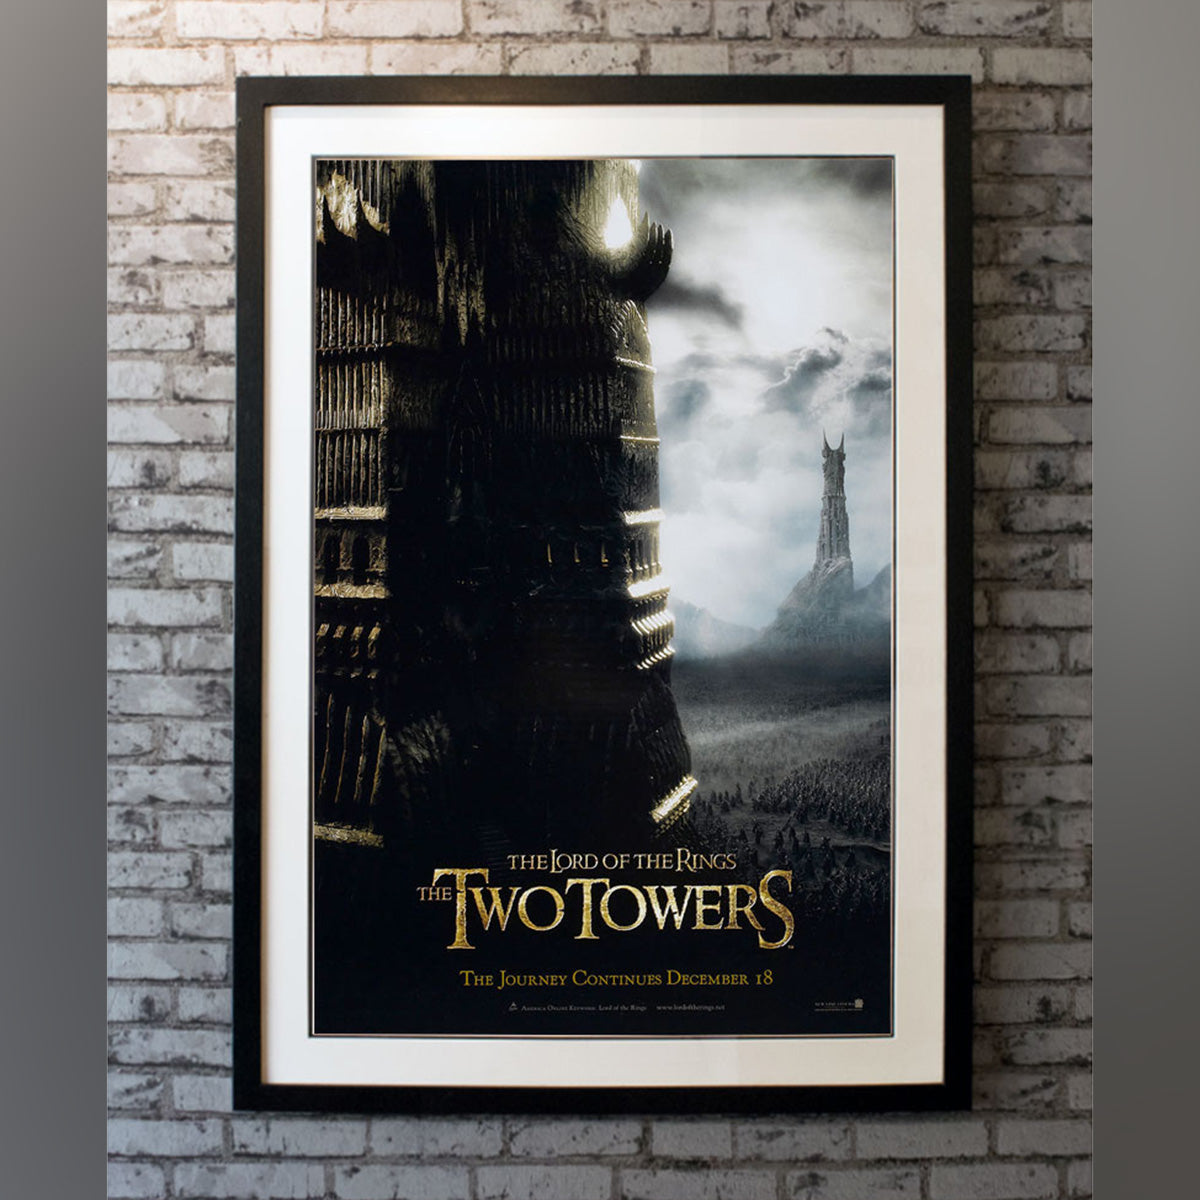 Original Movie Poster of Lord Of The Rings: The Two Towers (2002)